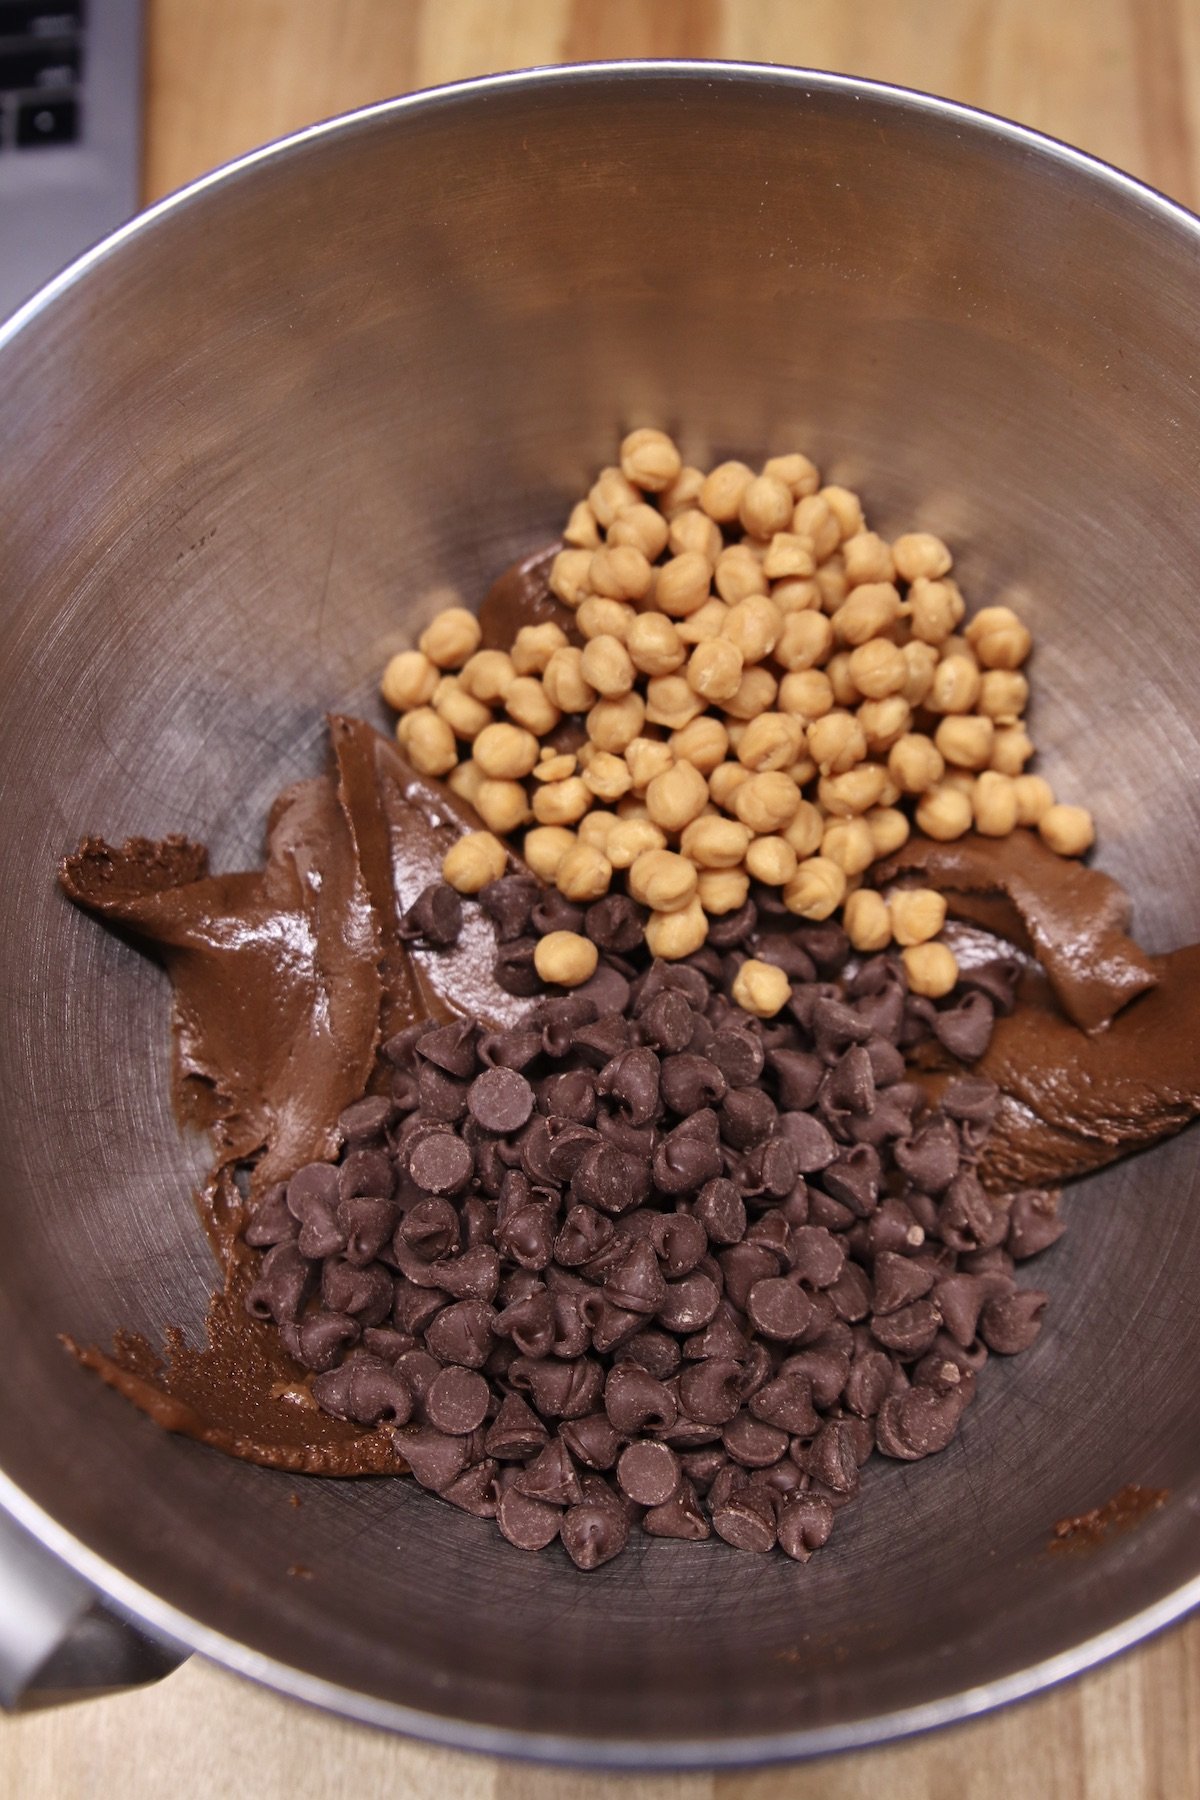 chocolate cookie dough with chocolate chips and caramel bits - not mixed